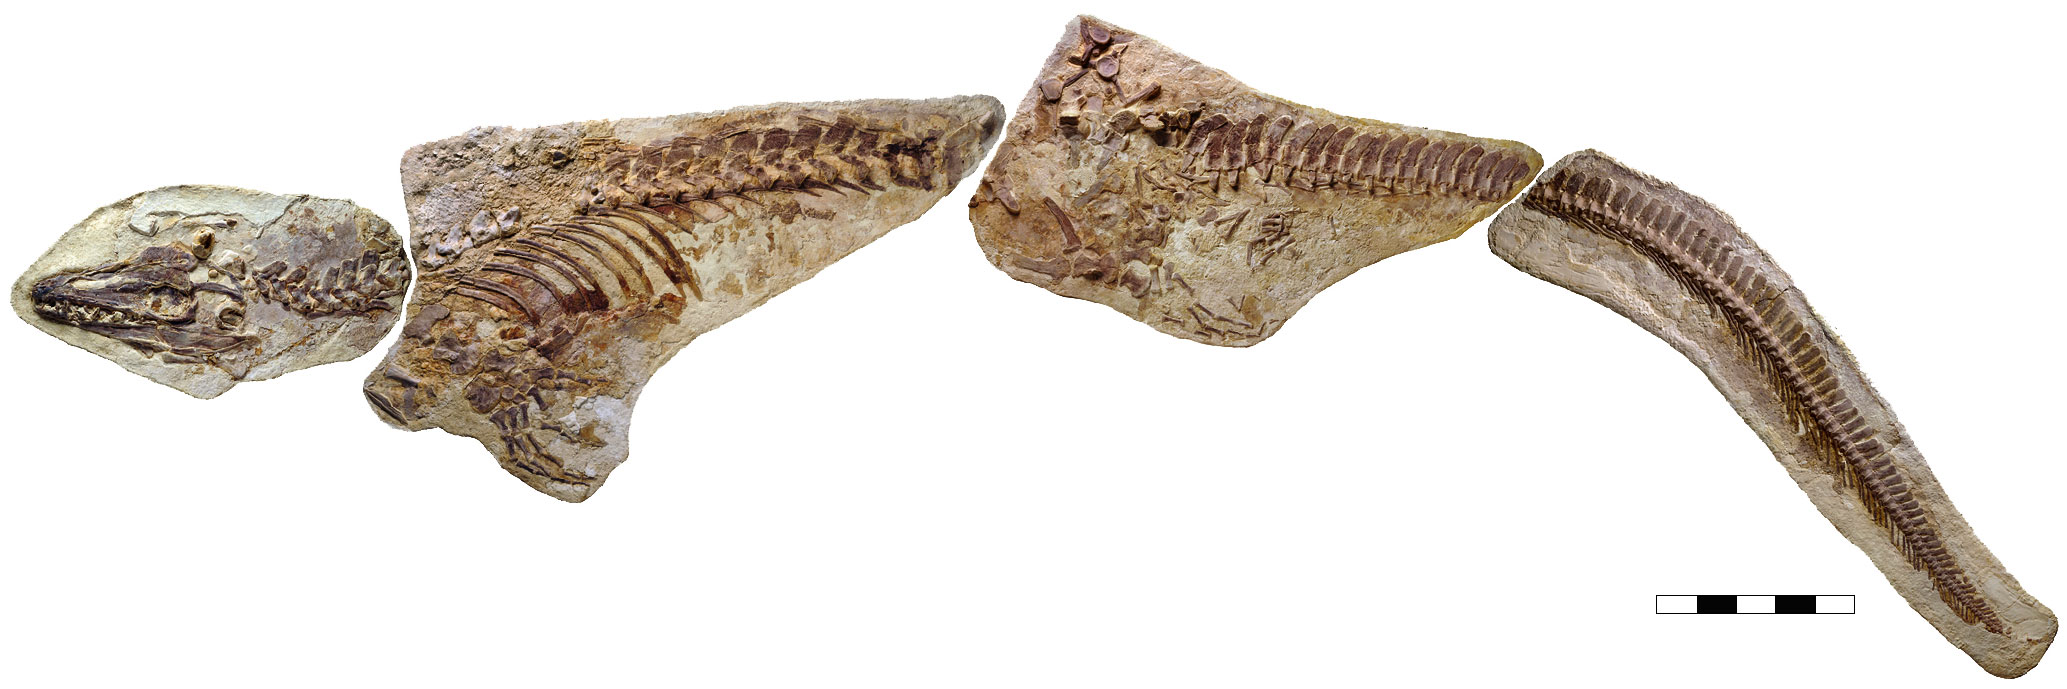 Photograph of the skeleton of the mosasaur Platecarpus. Mosasaurs have four paddle-like feet and large heads with pointed teeth. They also have long tails.